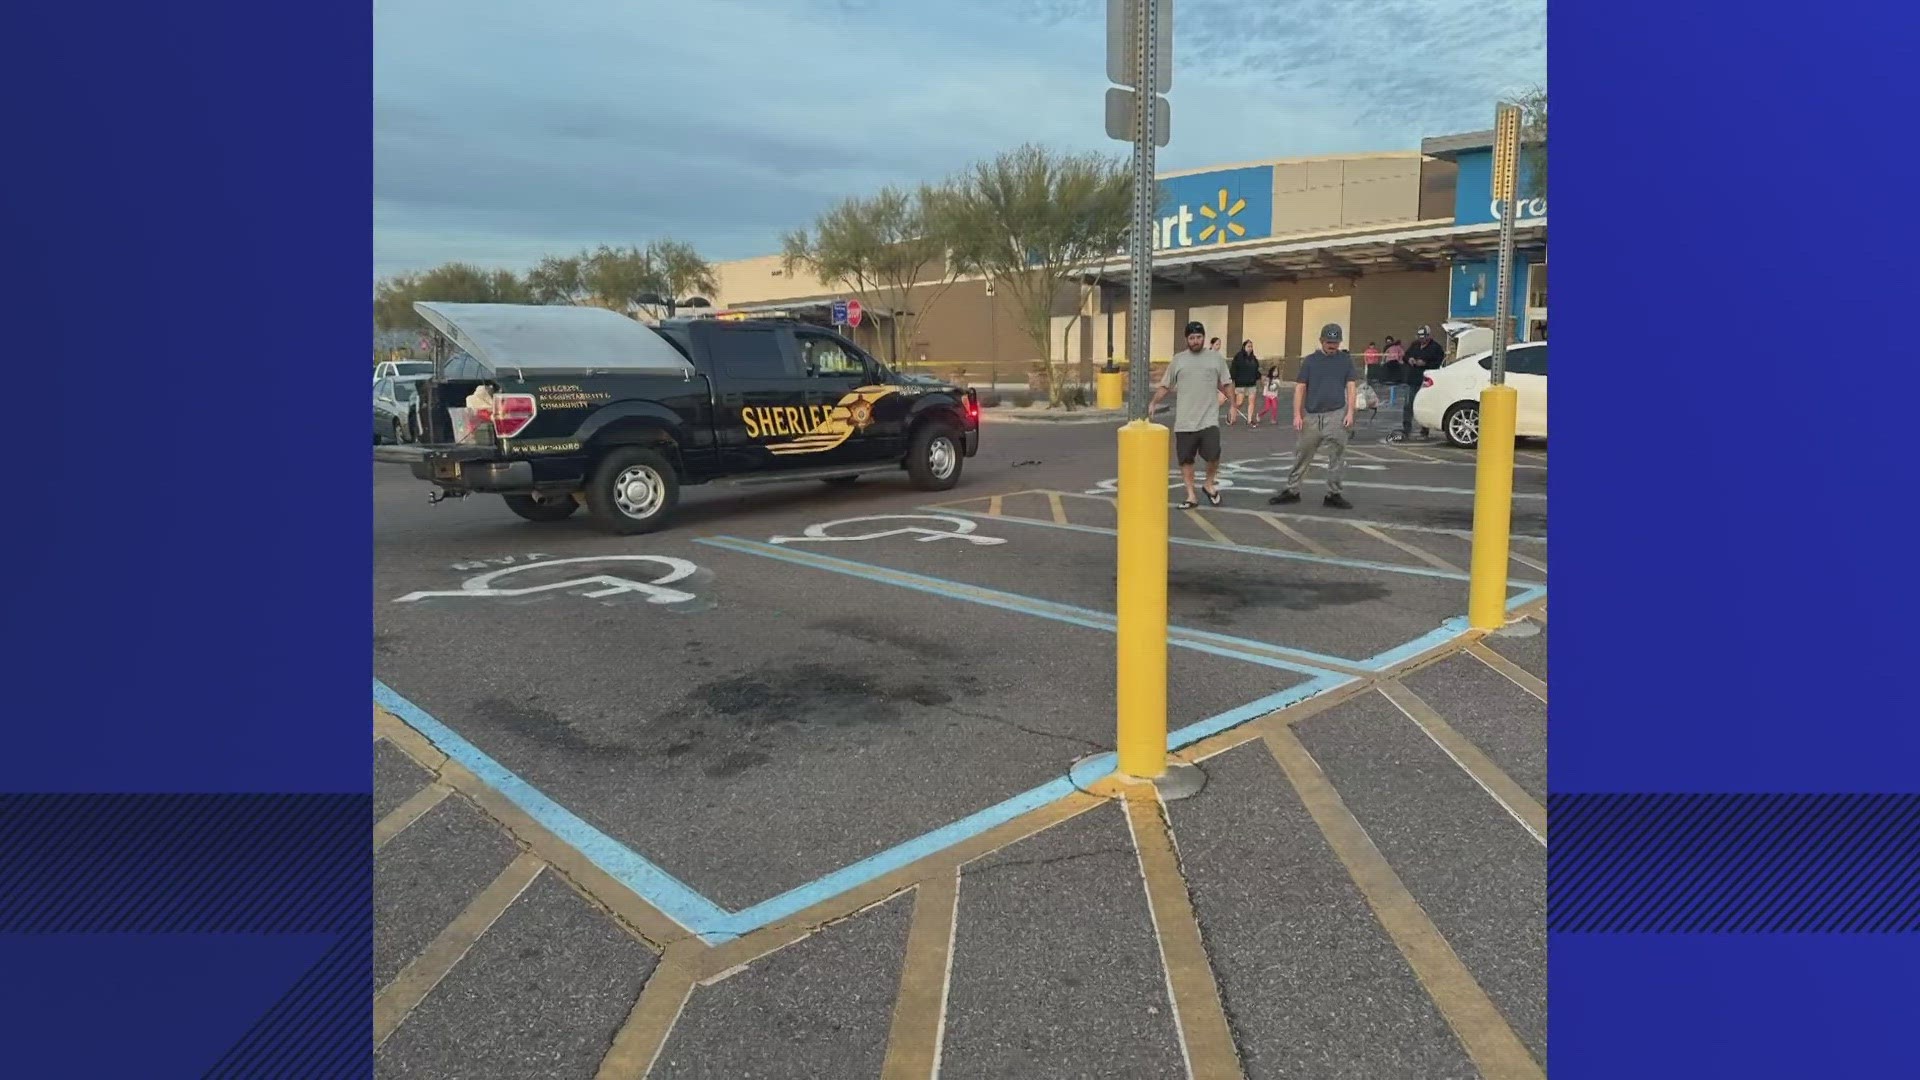 The incident happened on Sunday at the Walmart located near Cave Creek Road and Carefree Highway.